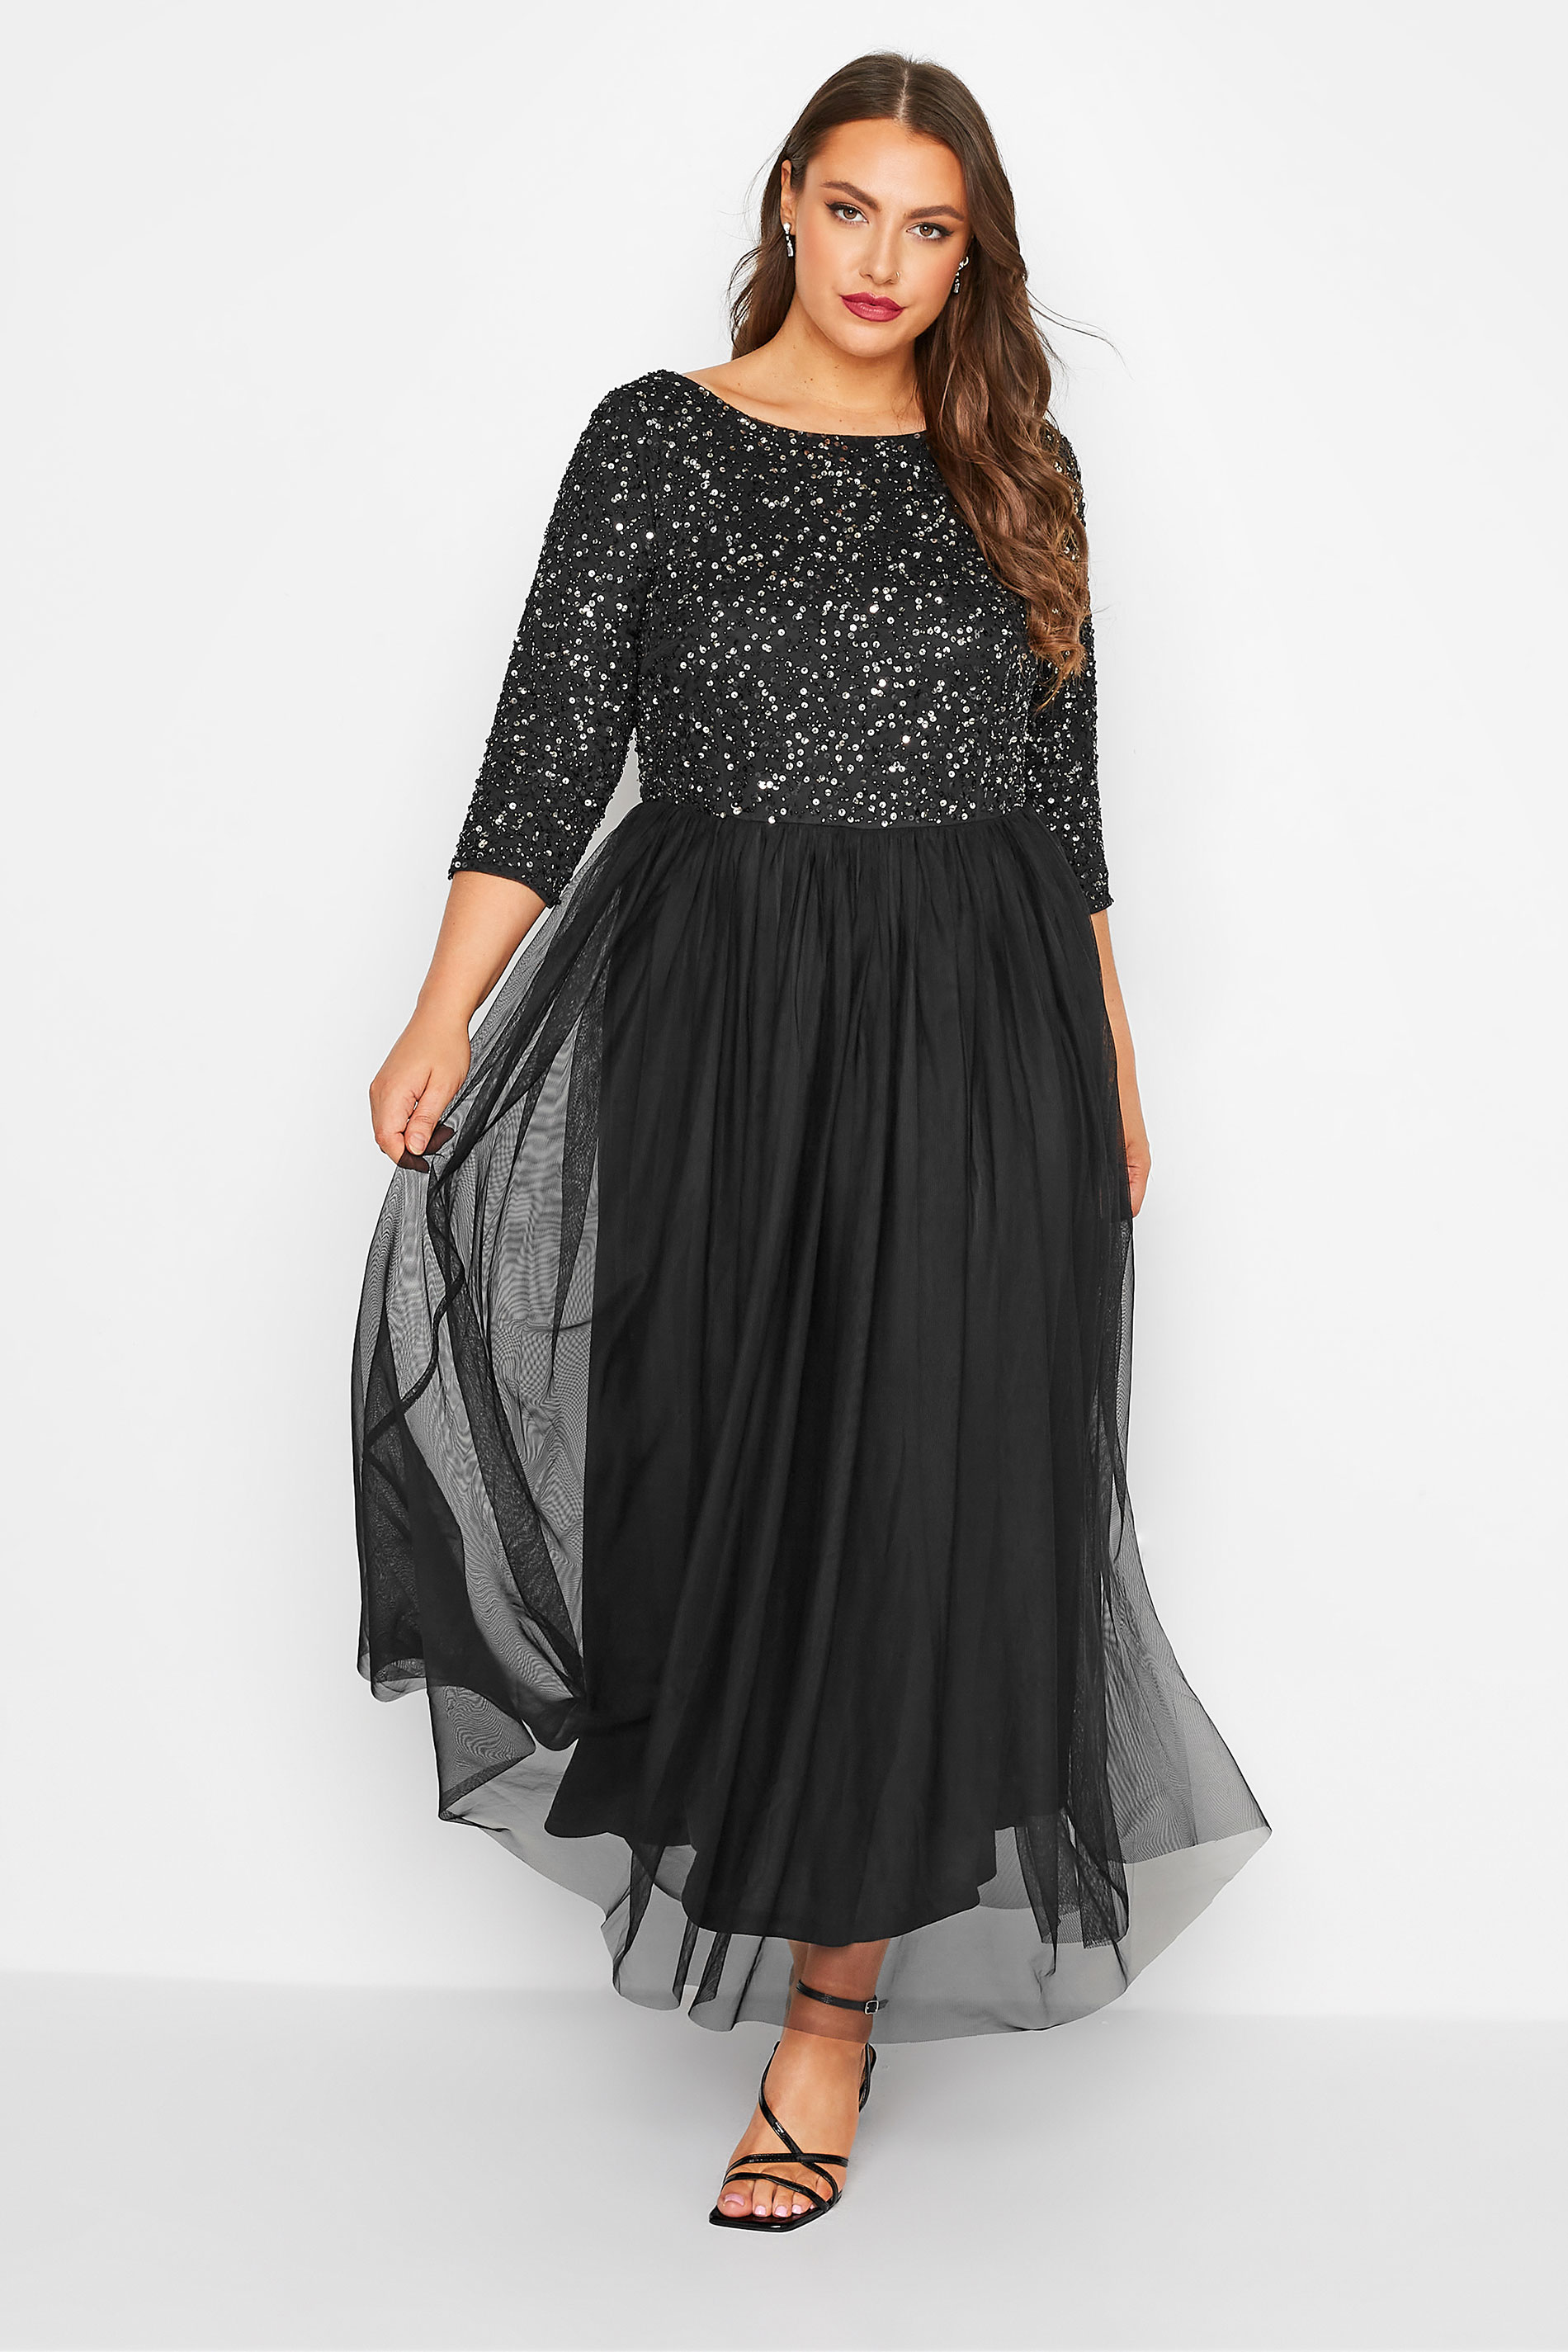 LUXE Plus Size Black Sequin Hand Embellished Maxi Dress | Yours Clothing 1